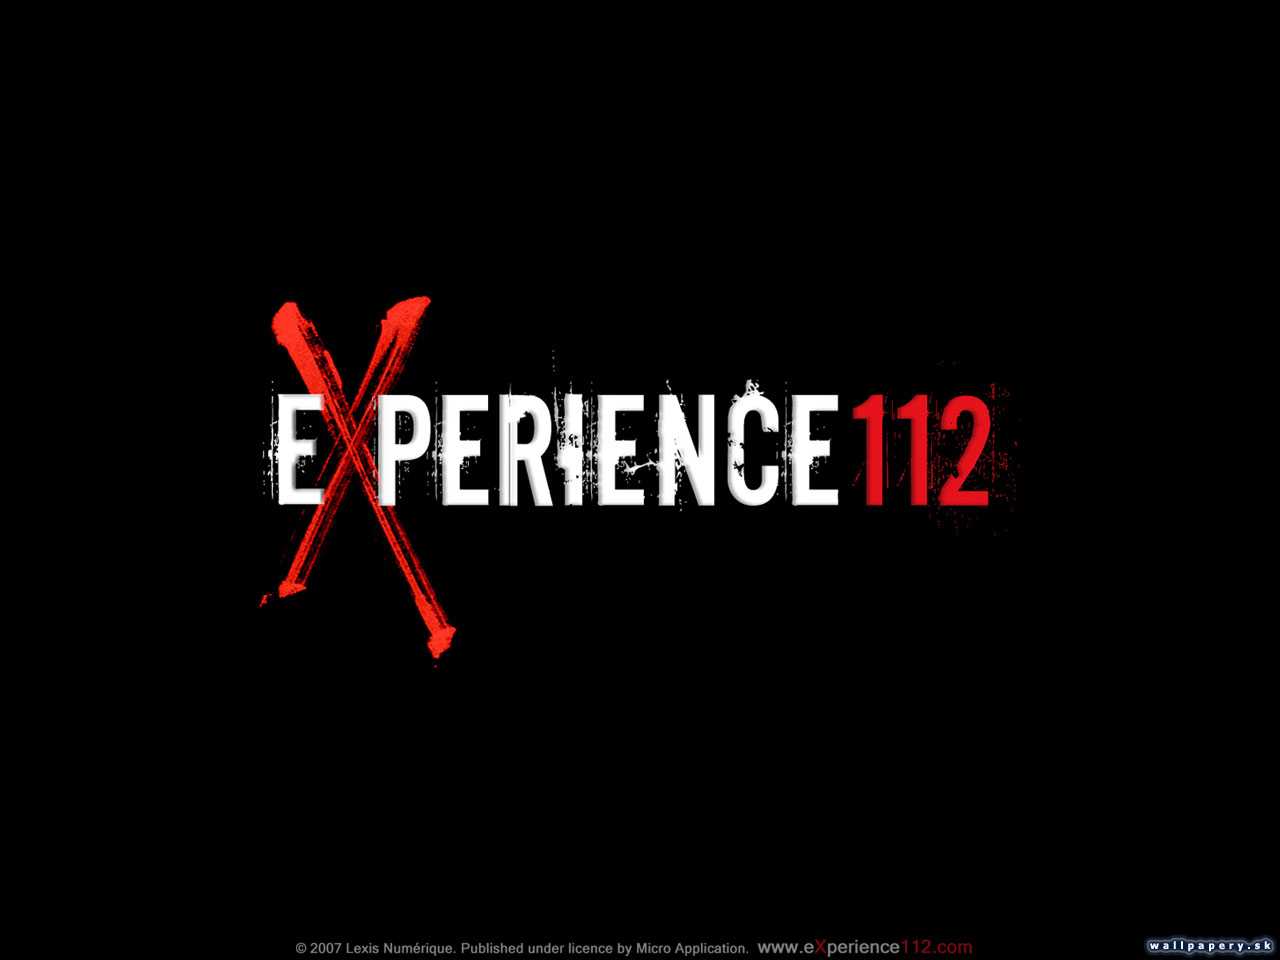 Experience 112 - wallpaper 7